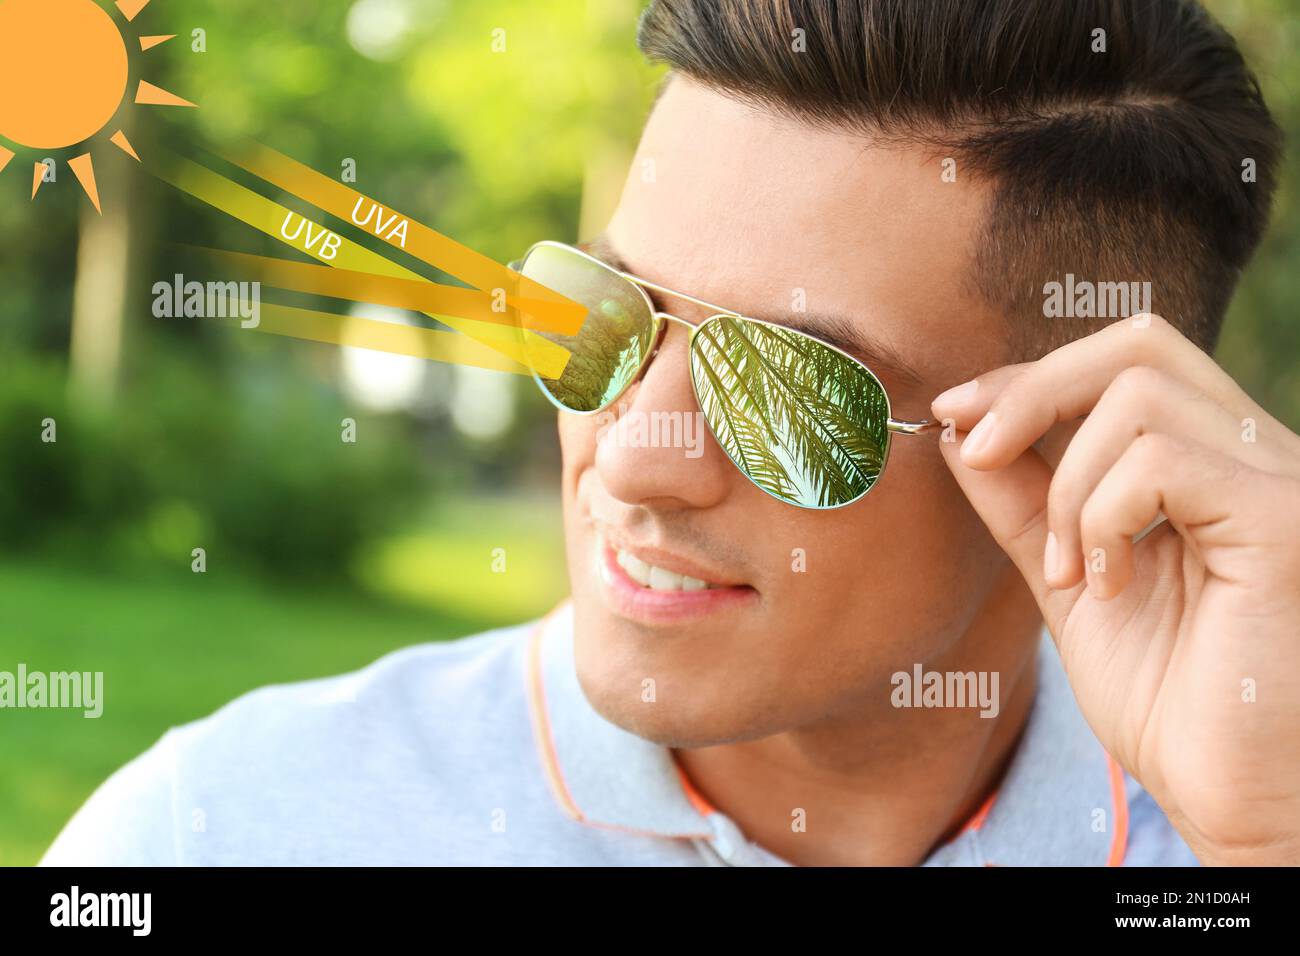 Man wearing sunglasses outdoors, closeup. UVA and UVB rays reflected by lenses, illustration Stock Photo